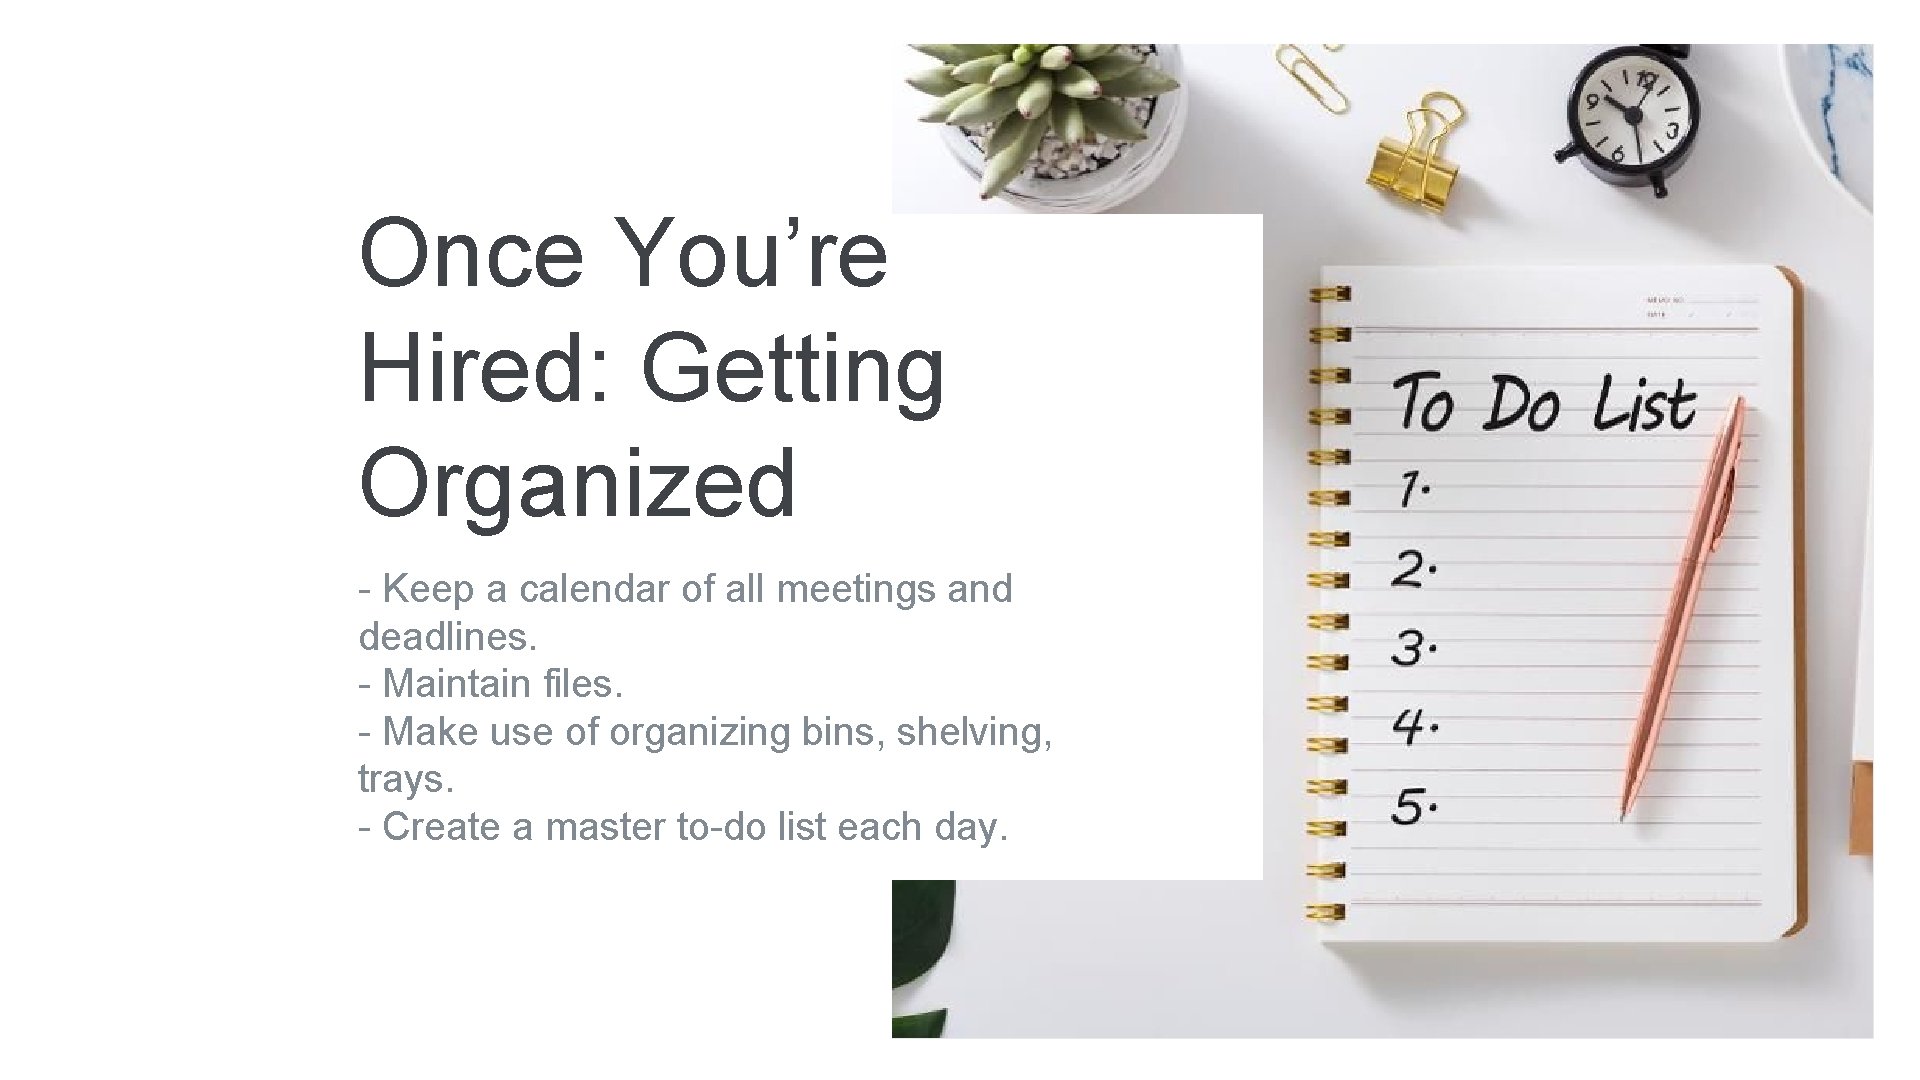 Once You’re Hired: Getting Organized - Keep a calendar of all meetings and deadlines.